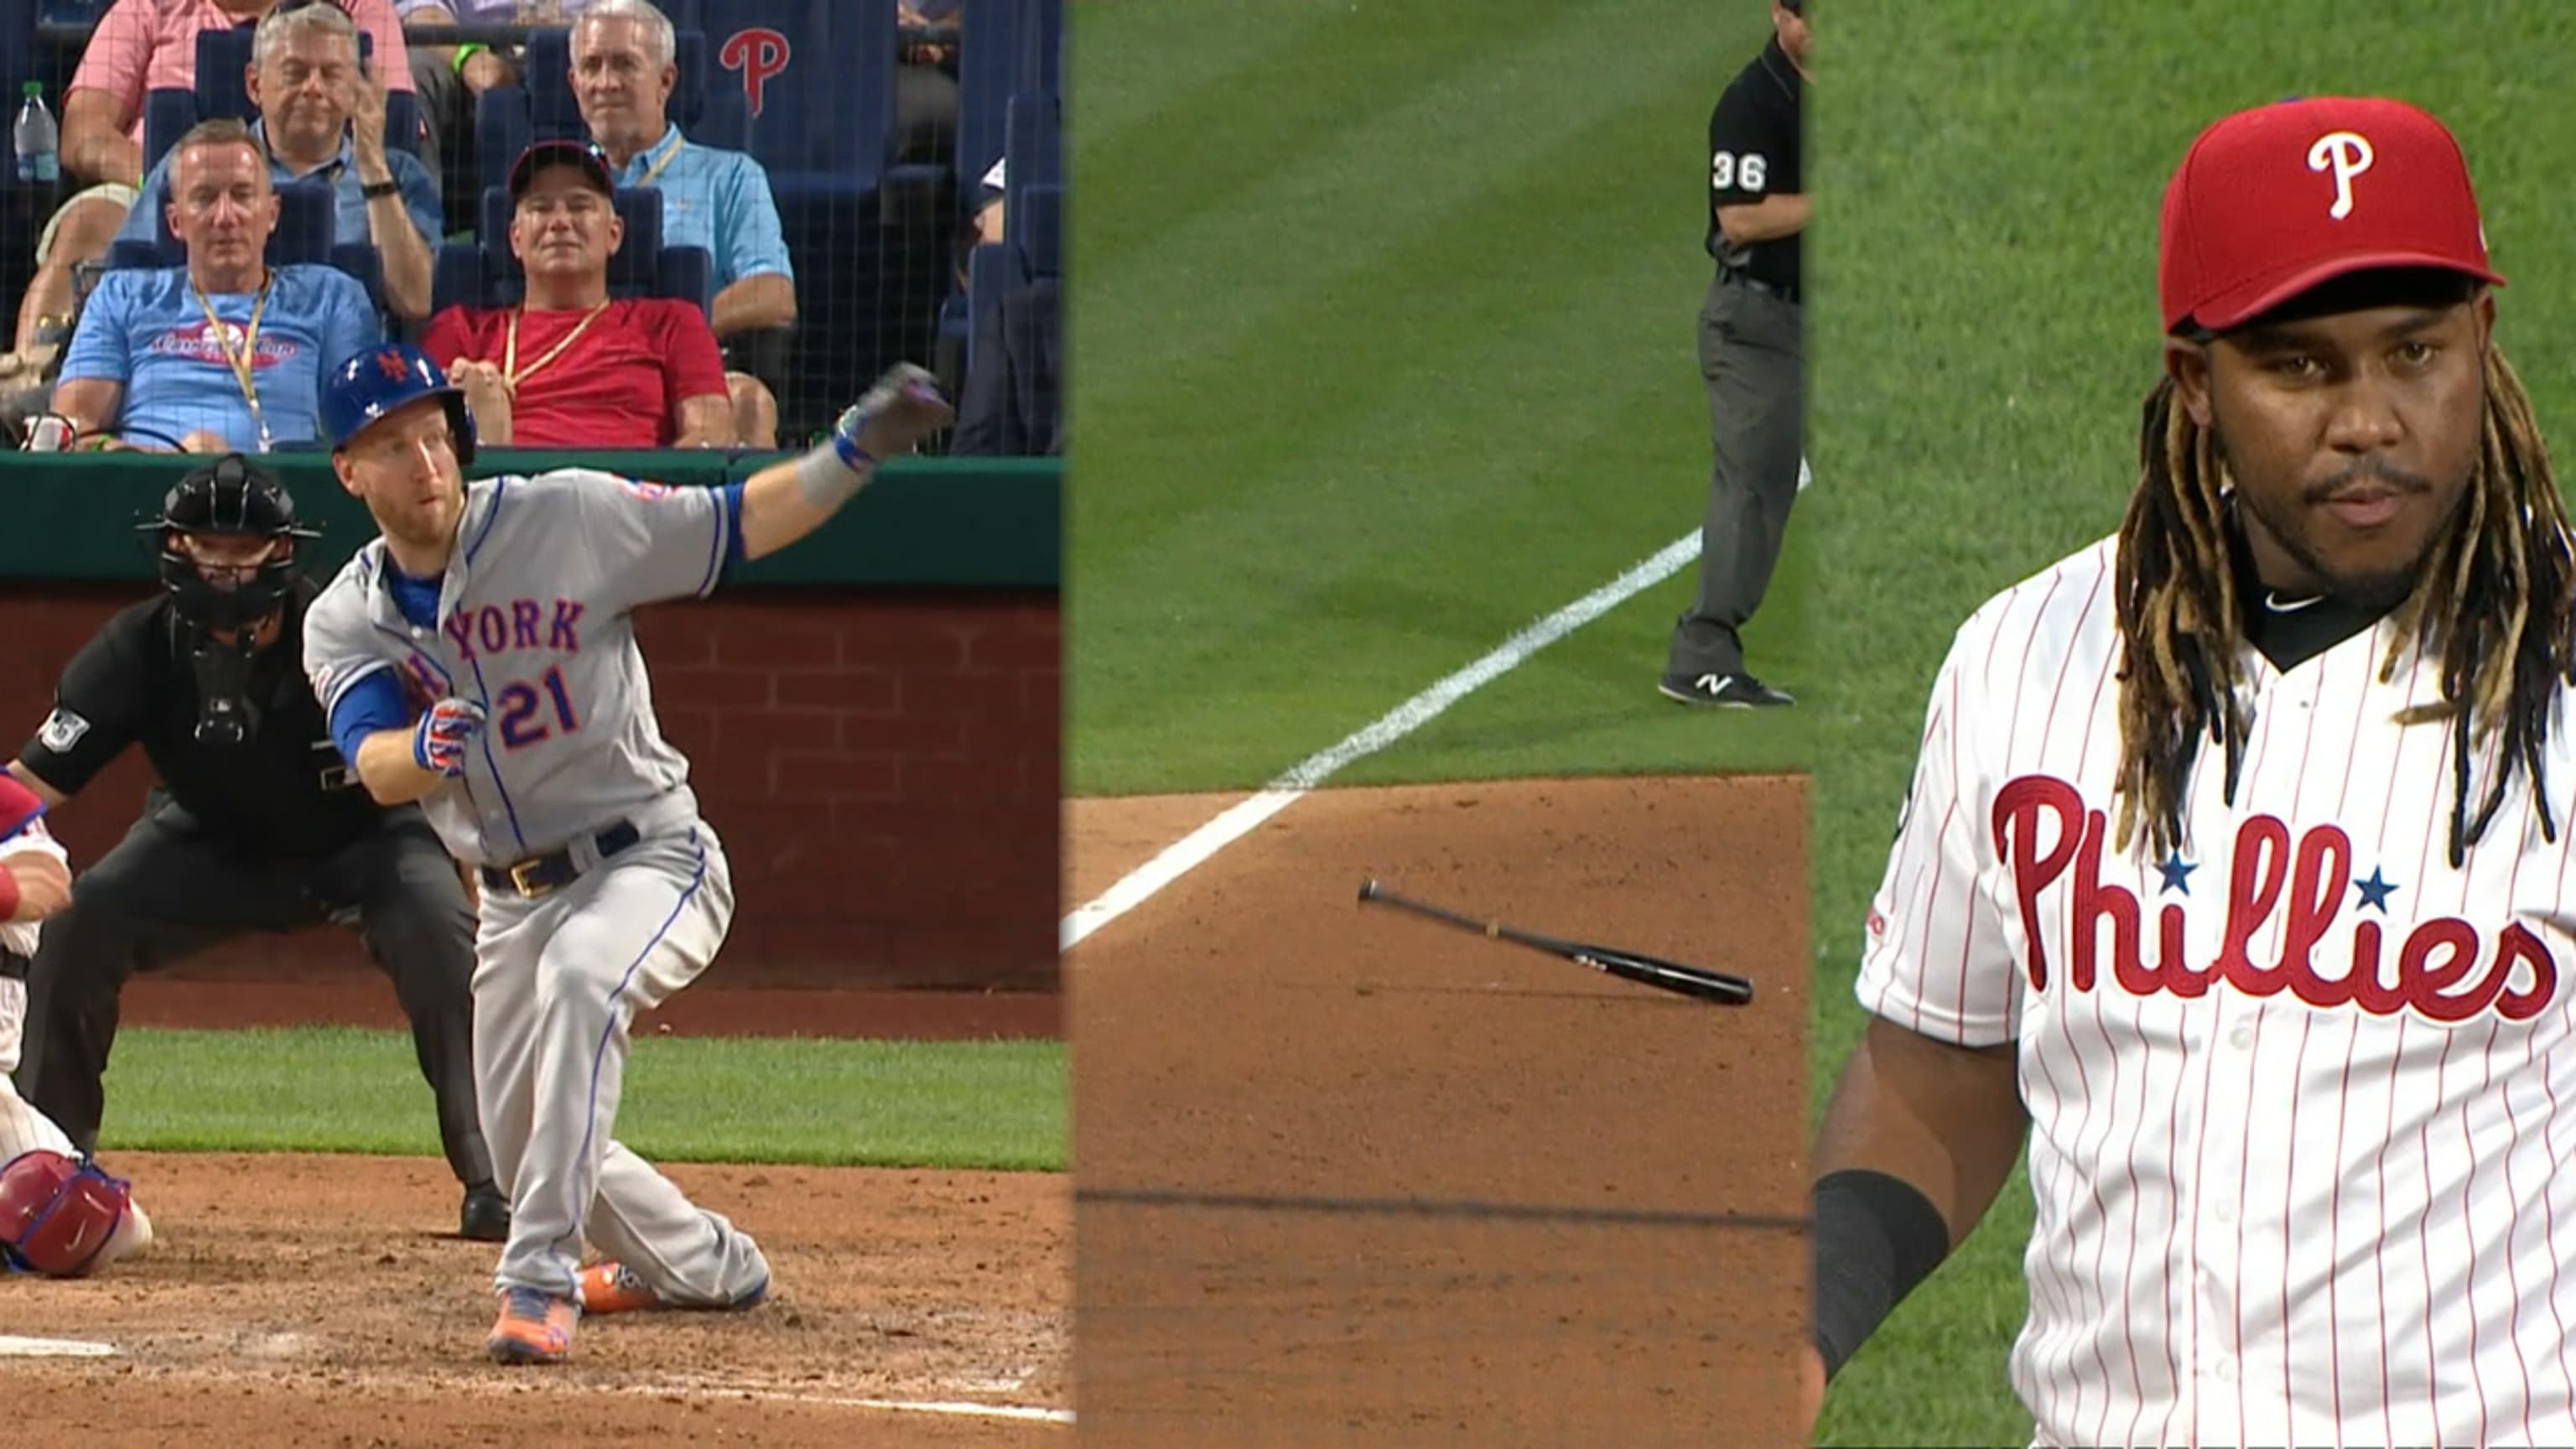 Todd Frazier loses bat, Maikel Franco reacts